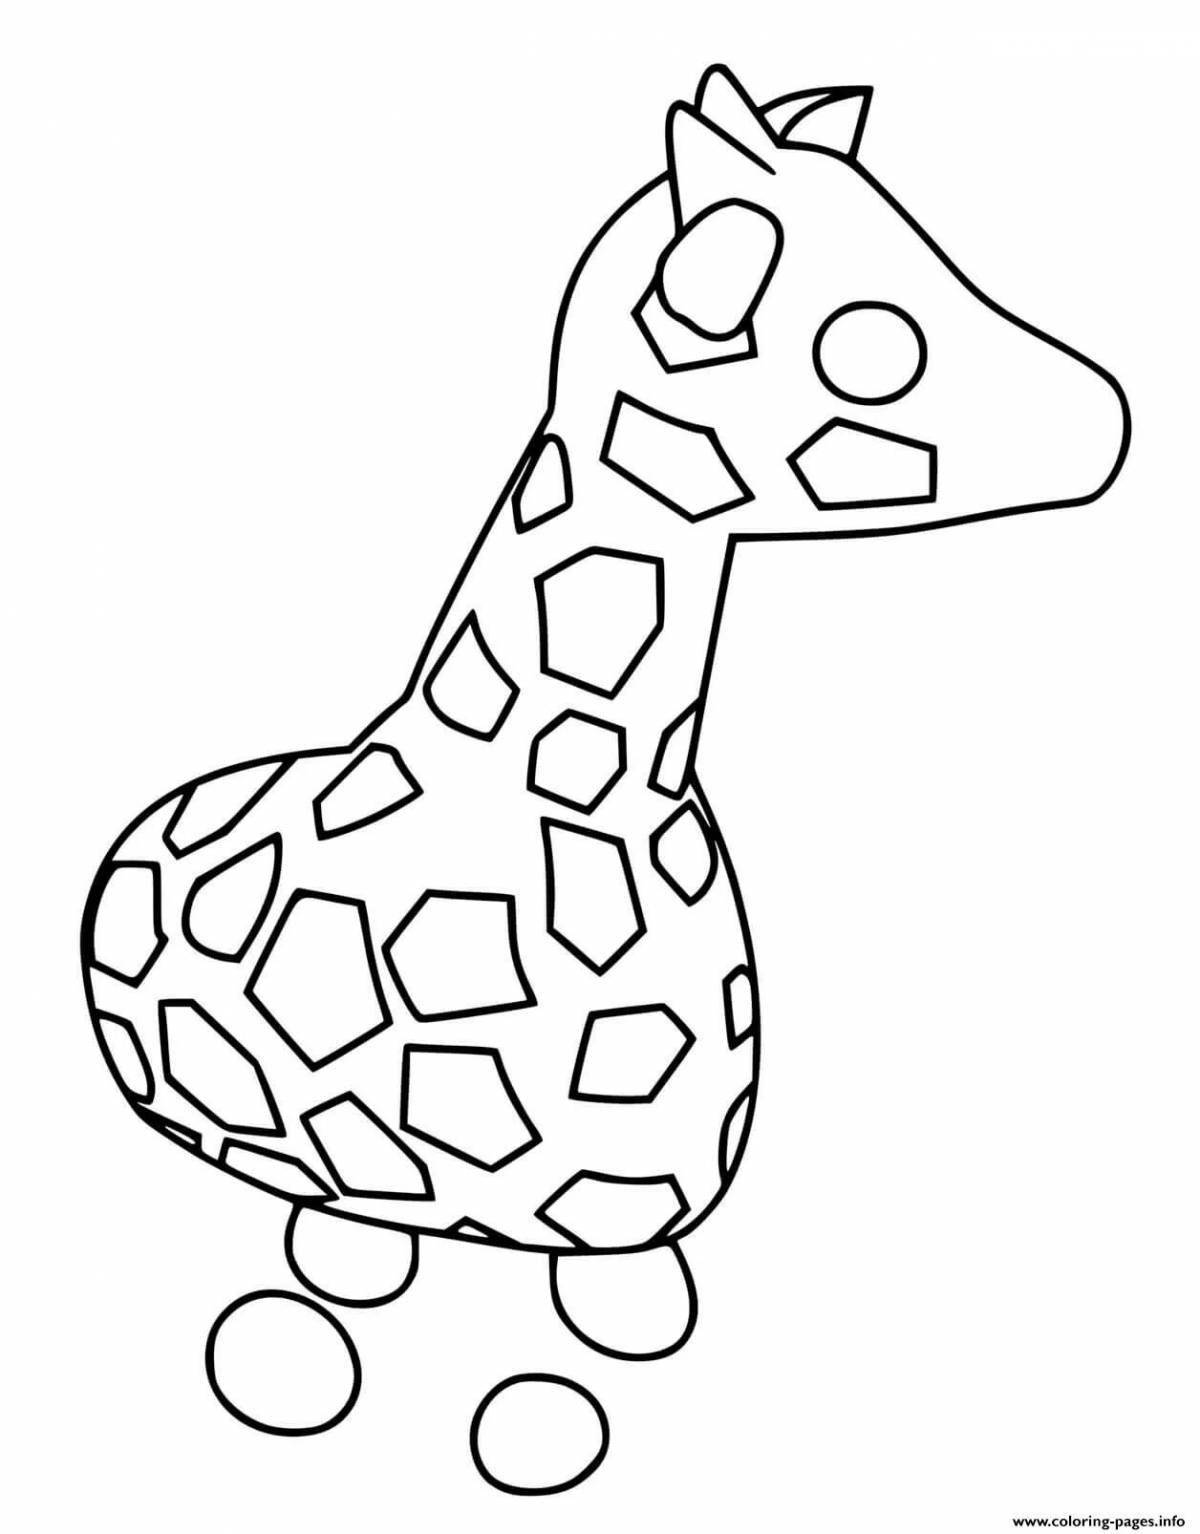 Adorable eggs adopt me coloring pages